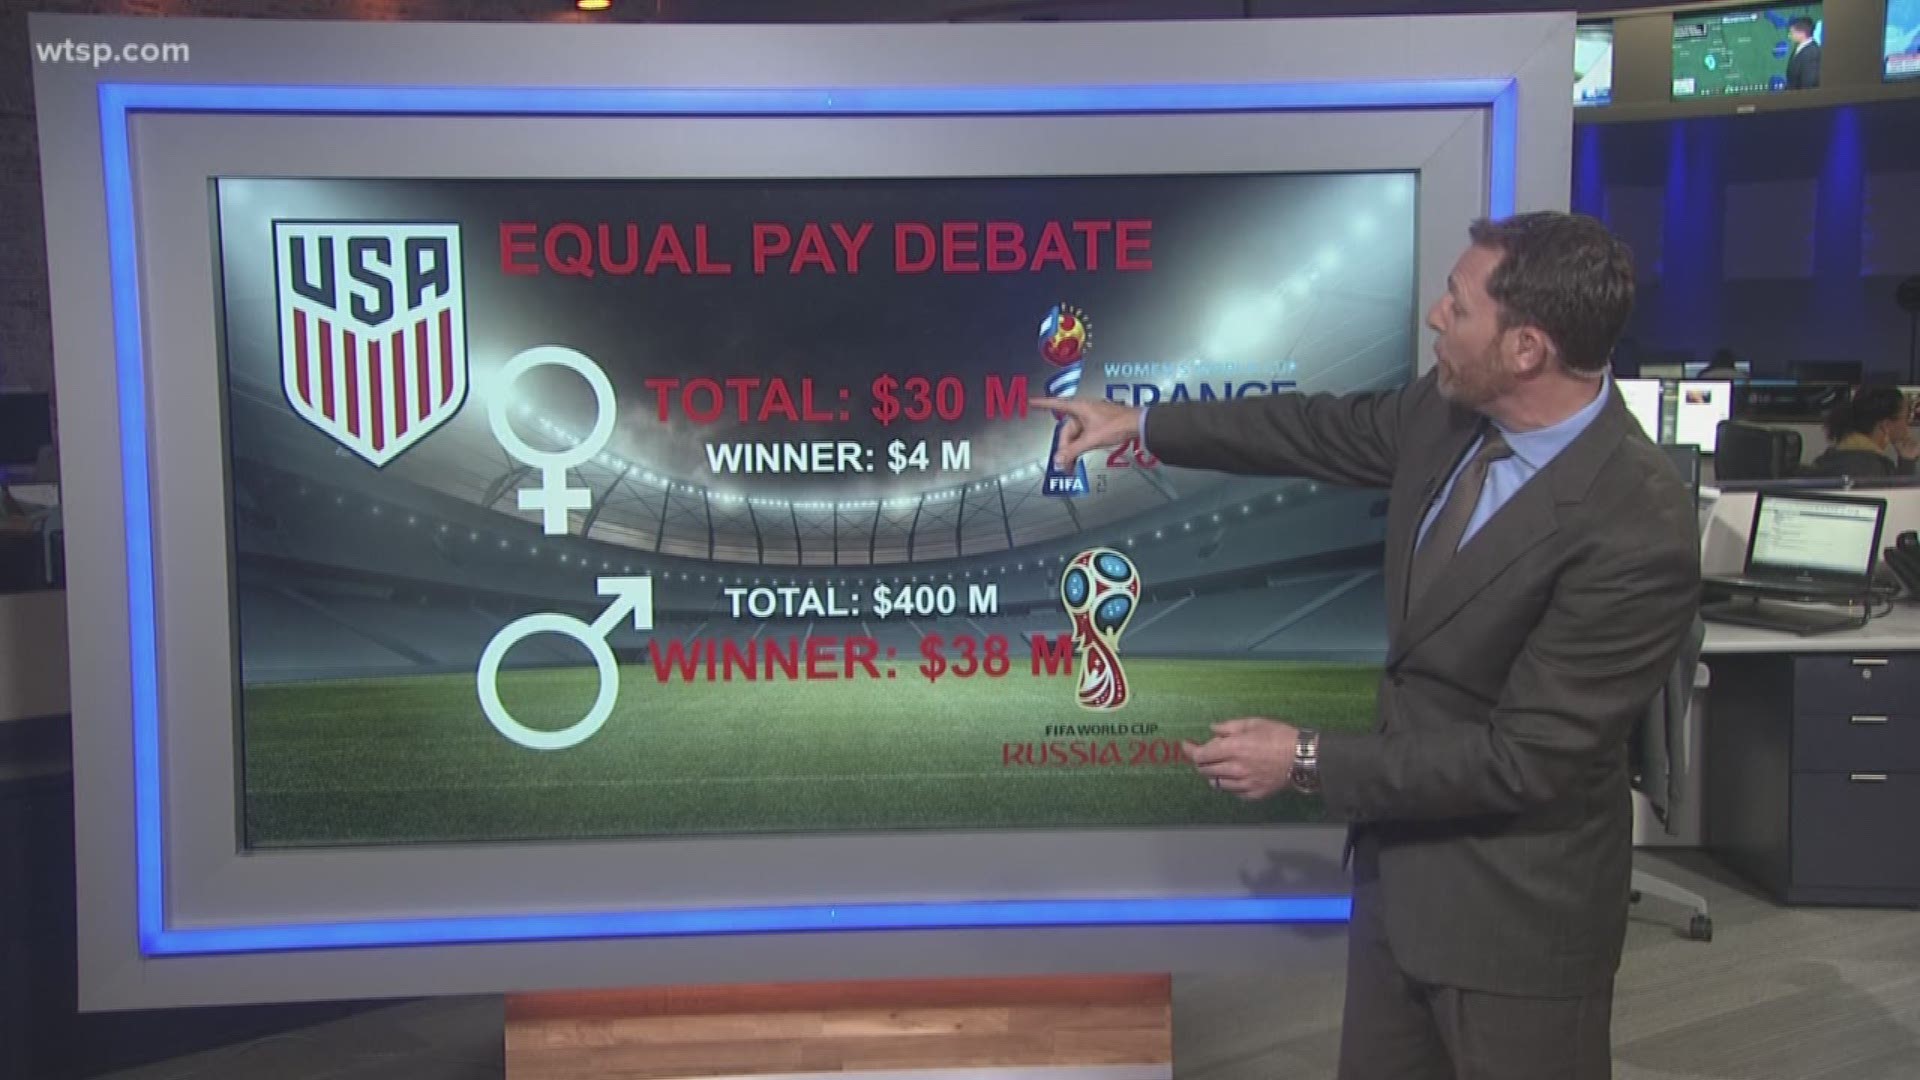 We all understand that numbers and statistics can be manipulated to prove almost anything, right? So, while everyone seems to be talking about the issue of equal pay right now, it’s important to compare apples to apples instead of apples to oranges, or even apples to avocados.

Keep in mind, the U.S. men’s and women’s national teams don’t play the same number of games; and they each have their own separate collective bargaining agreements with U.S. Soccer, so comparing their salaries and bonus structures can be extremely challenging.